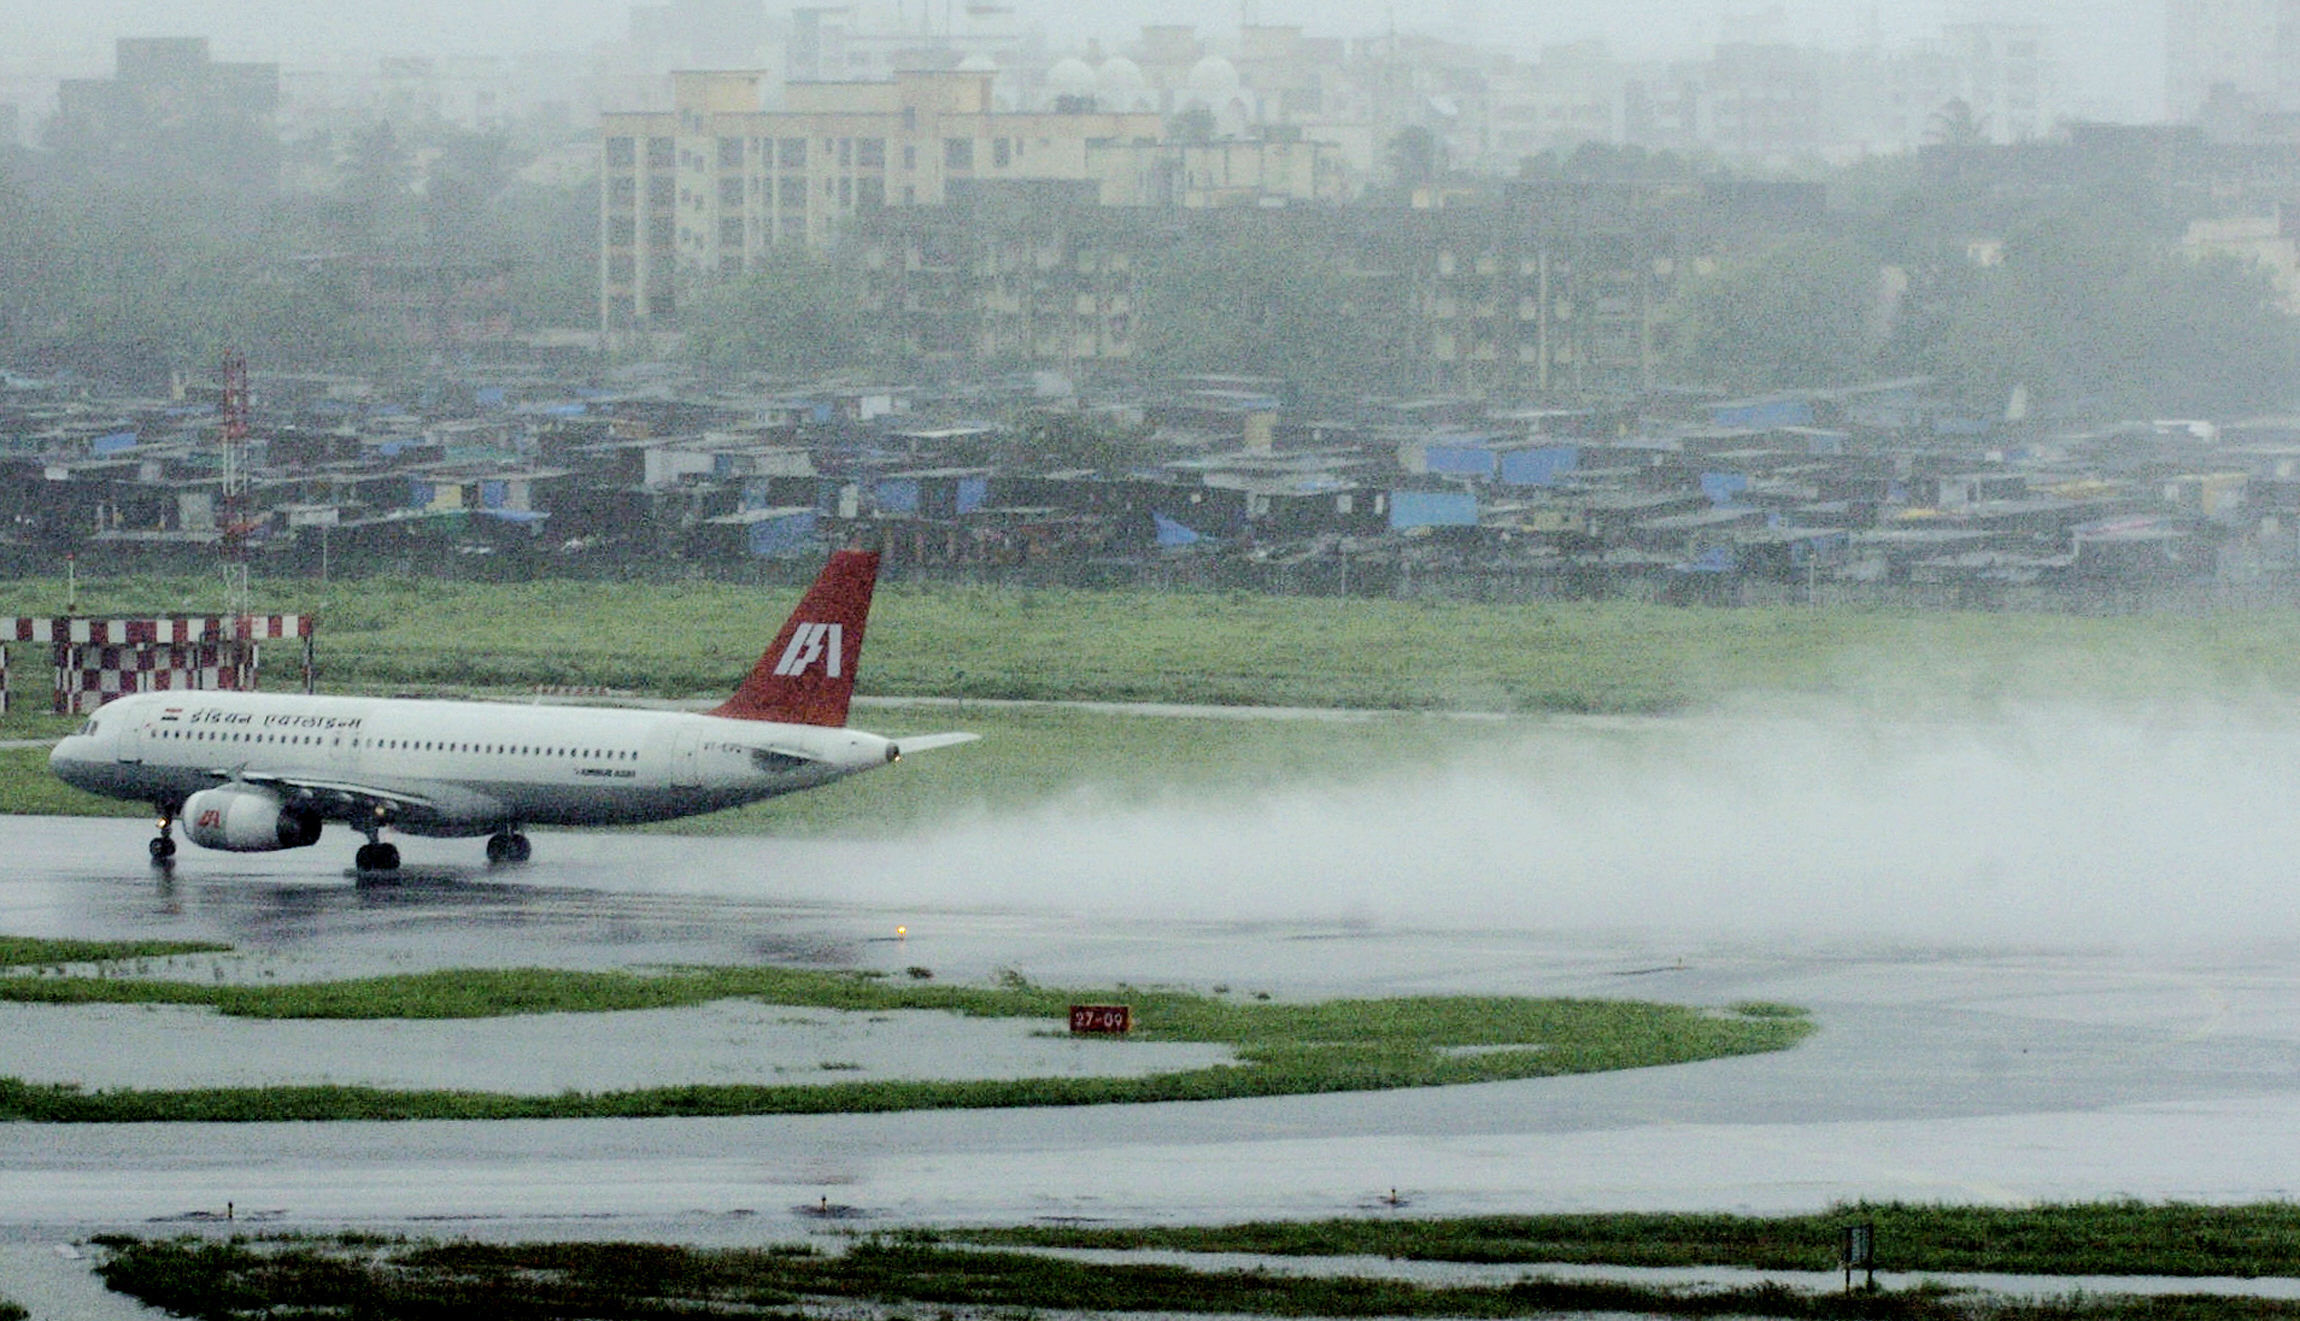 An Indian Airlines aircraft takes off amidst heavy rain from the Chhatrapati Shivaji International airport, in Mumbai 01 August 2005. [File Photo: AFP/INDRANIL MUKHERJEE]